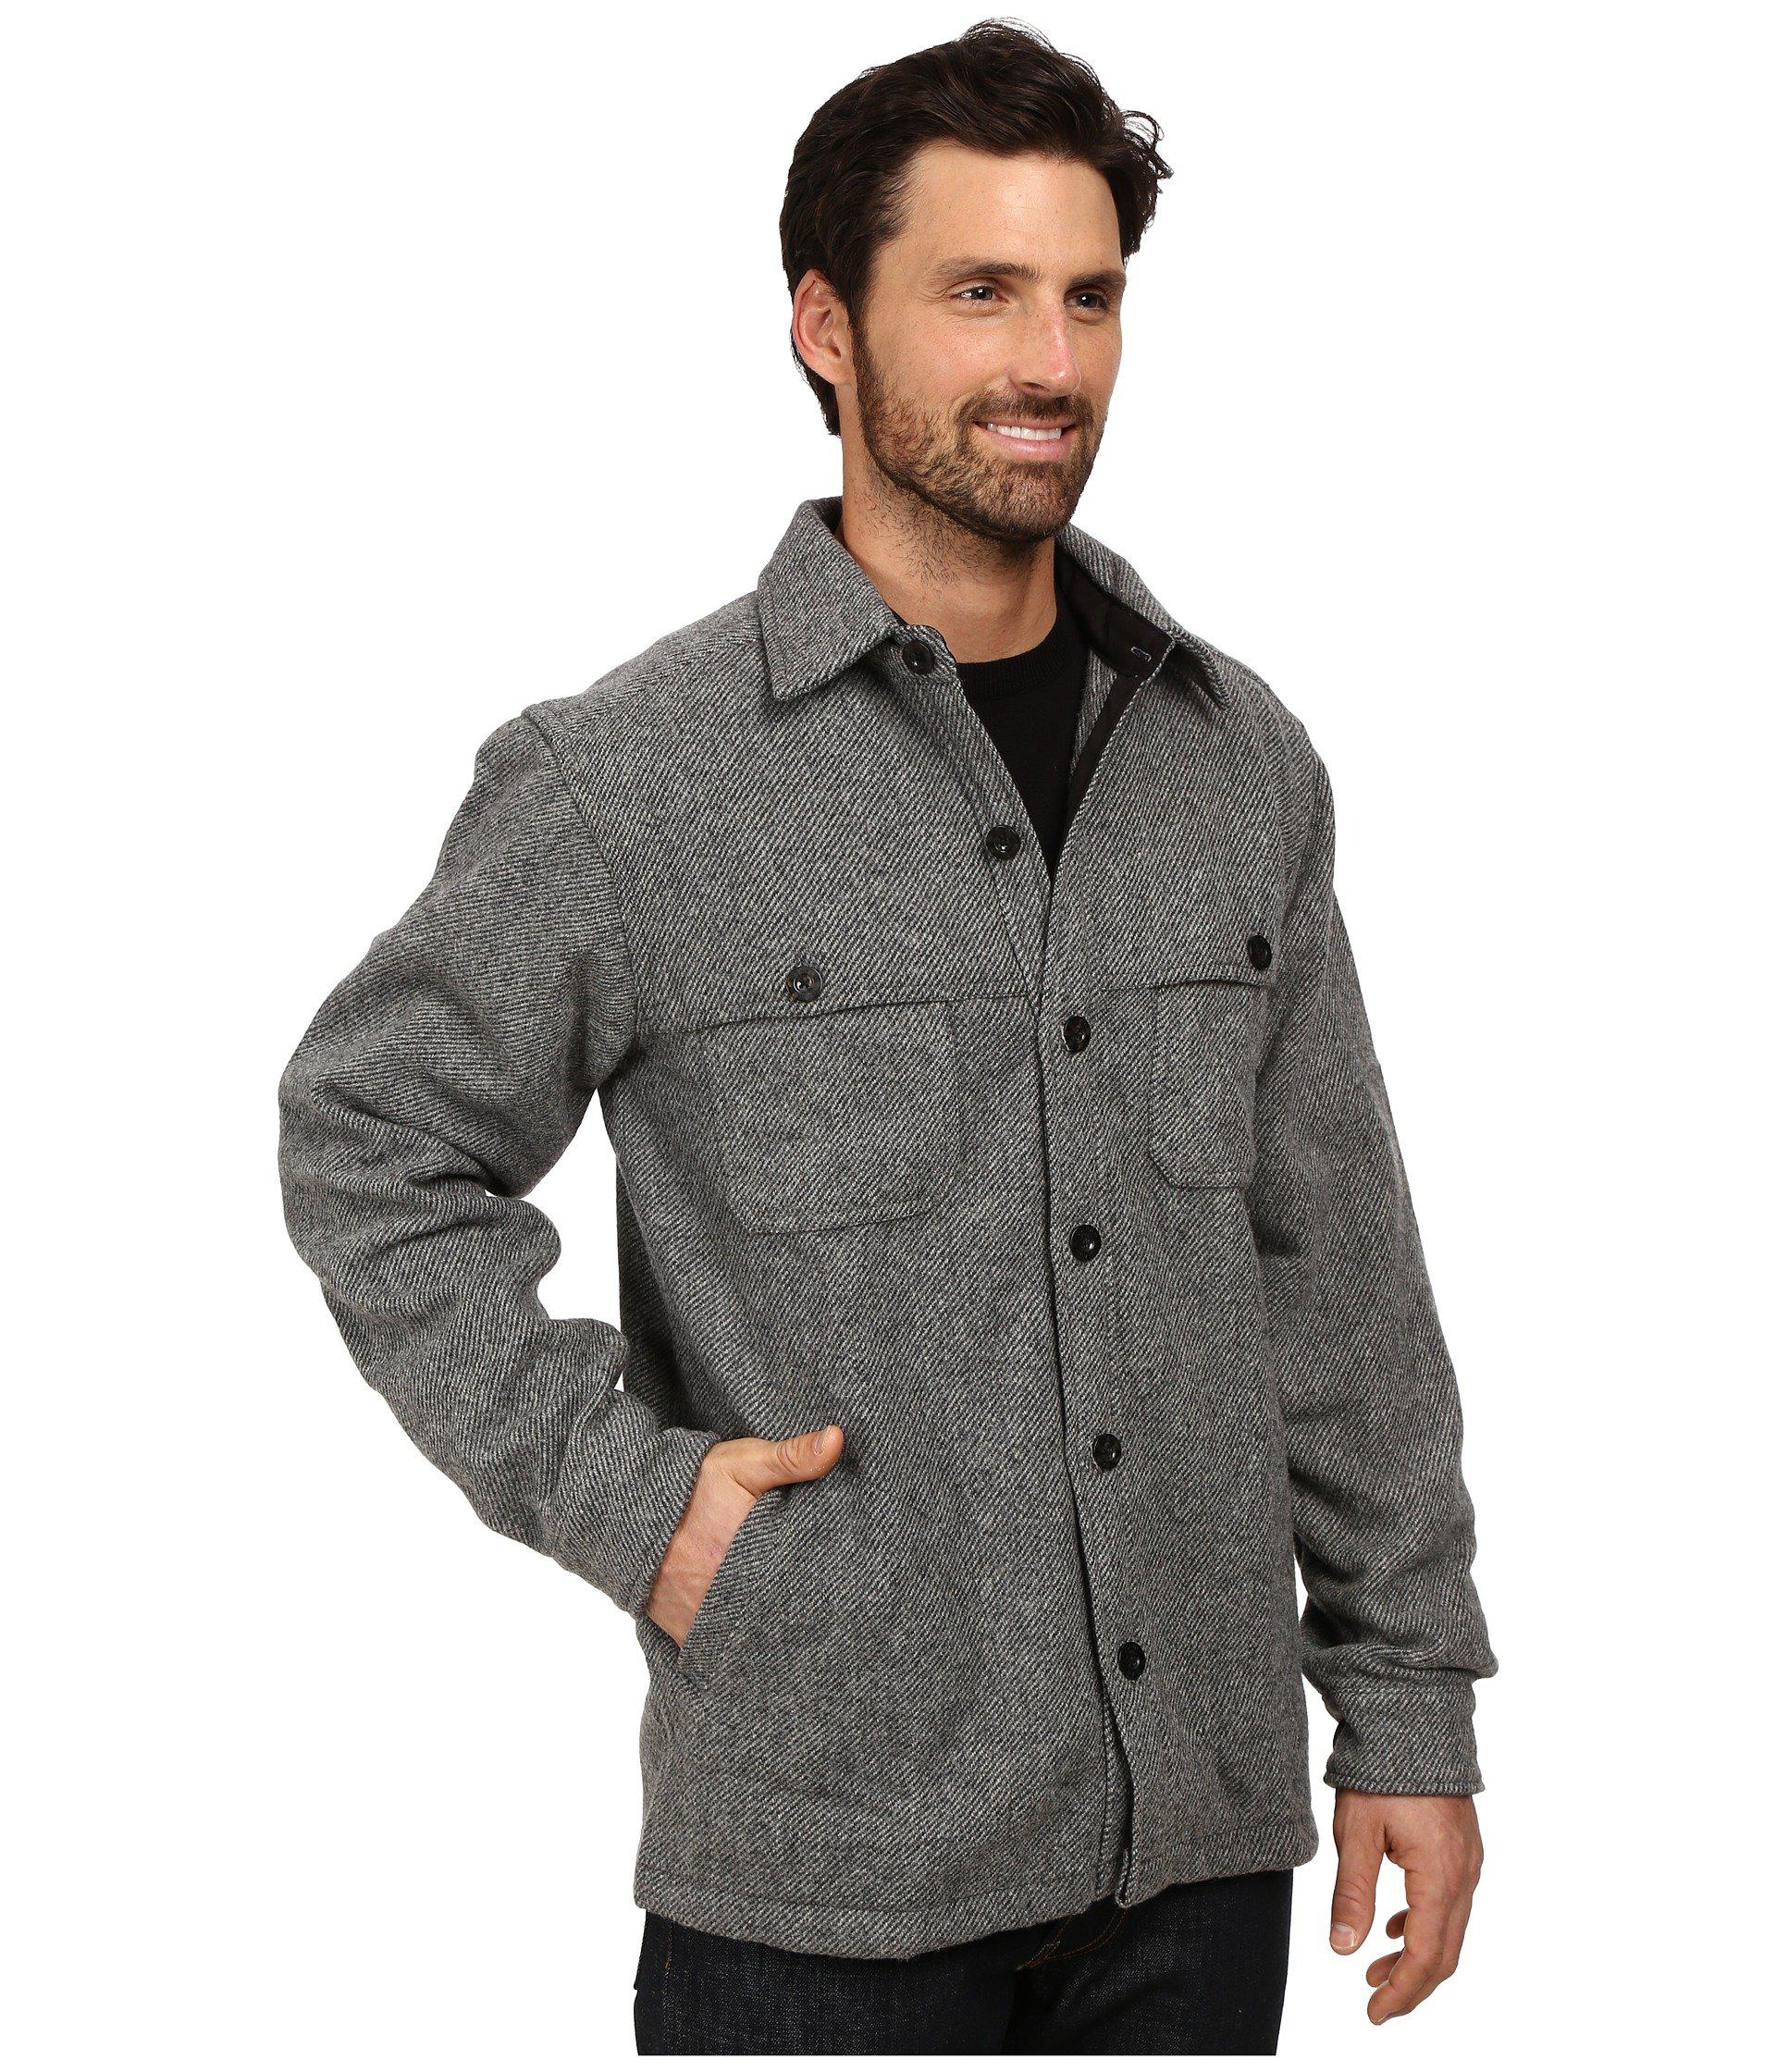 Lyst - Woolrich Wool Stag Shirt Jacket in Gray for Men